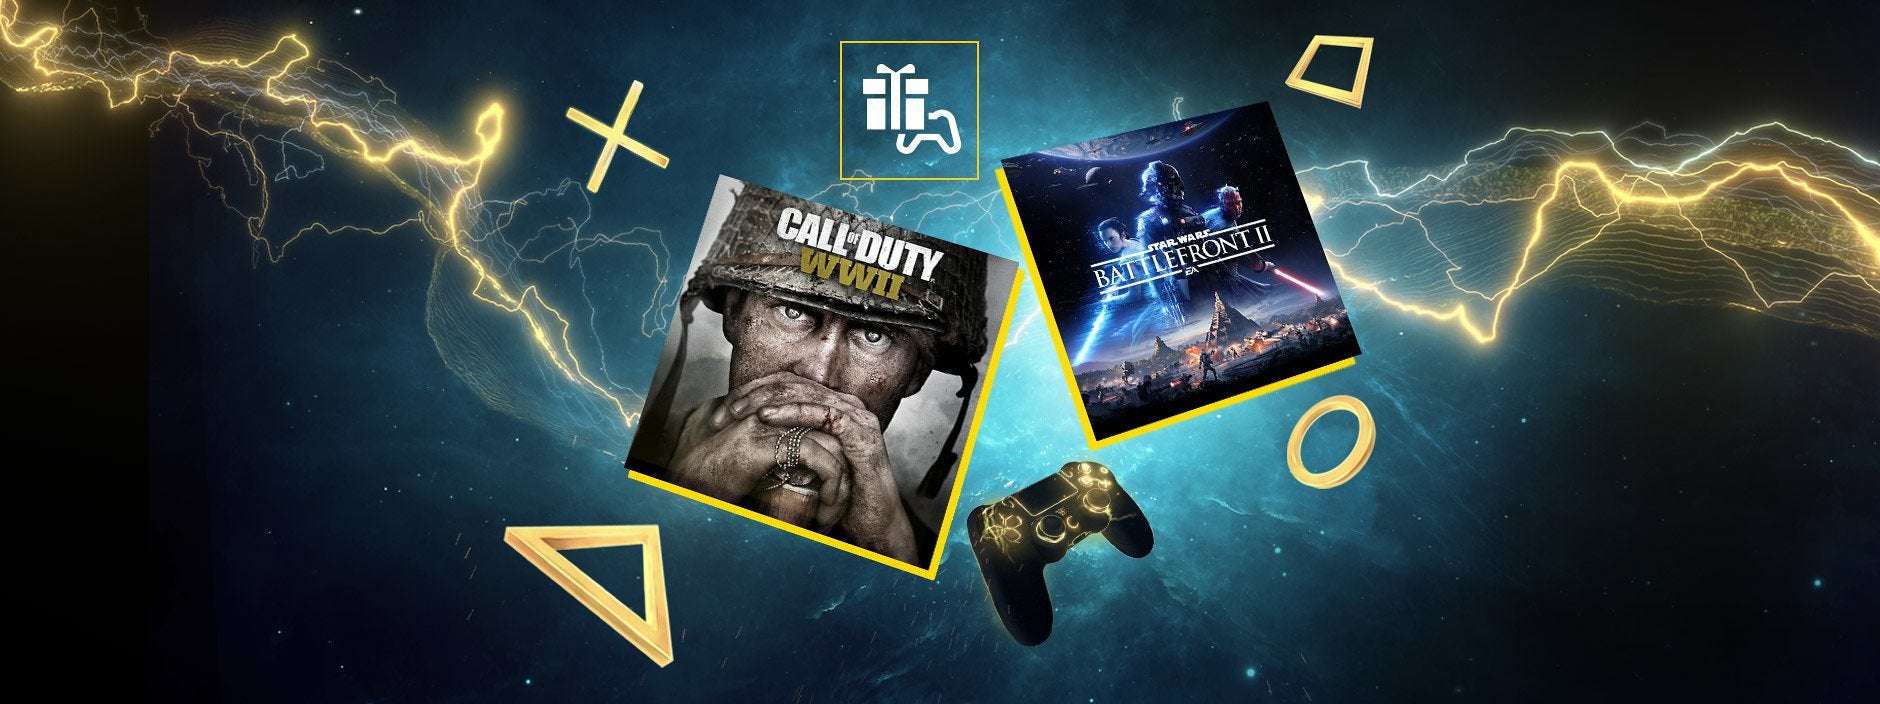 image for Star Wars Battlefront II and Call of Duty: WWII are your PS Plus games for June